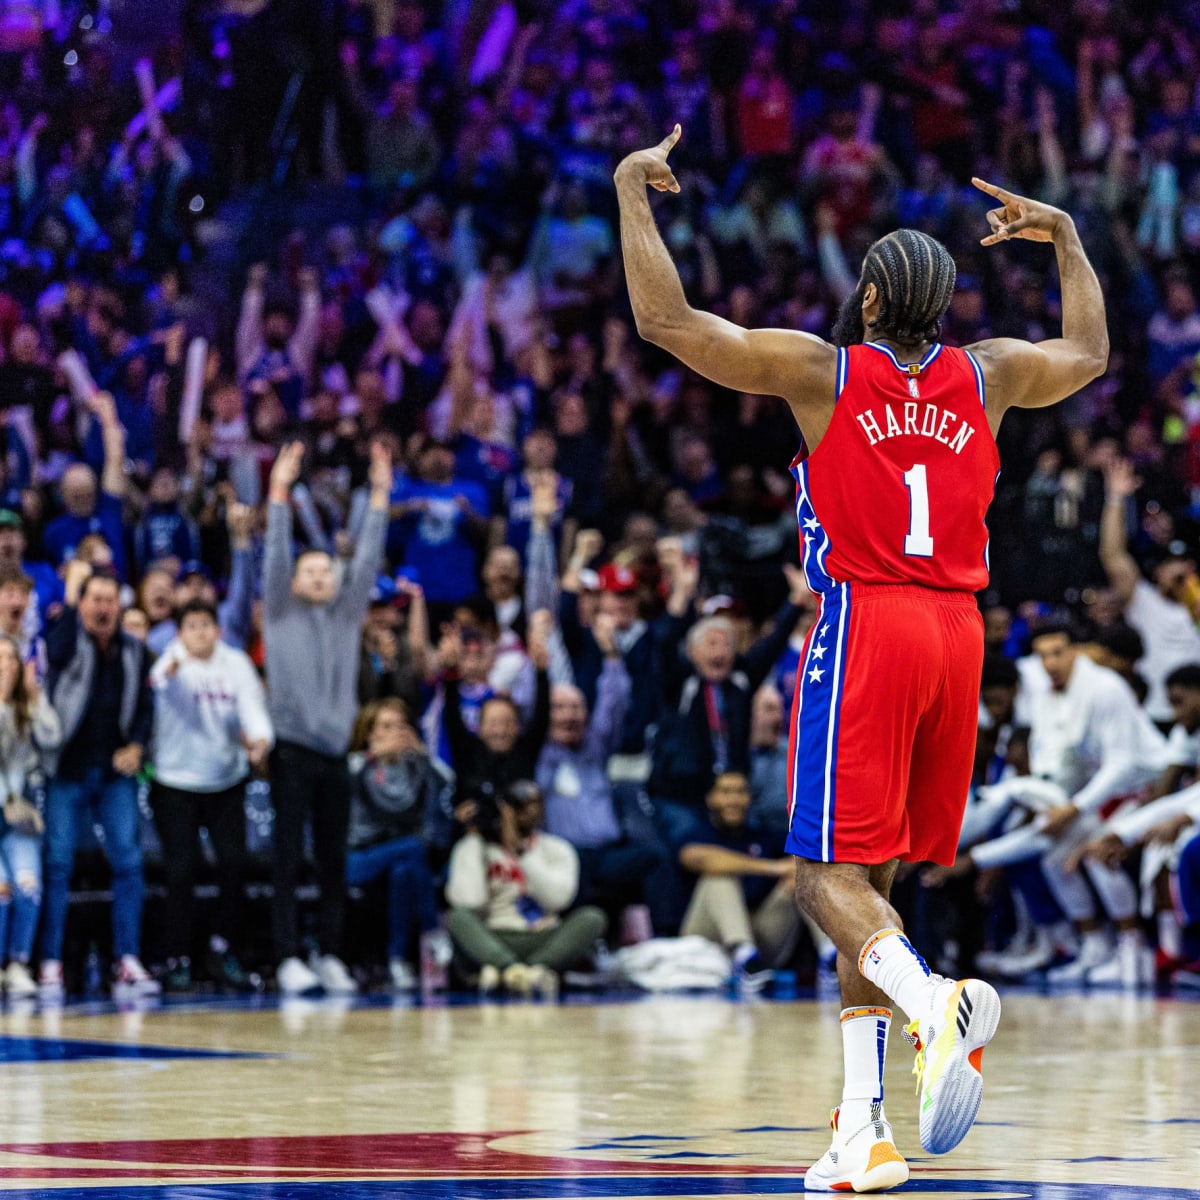 Sixers: James Harden to re-sign on two-year contract